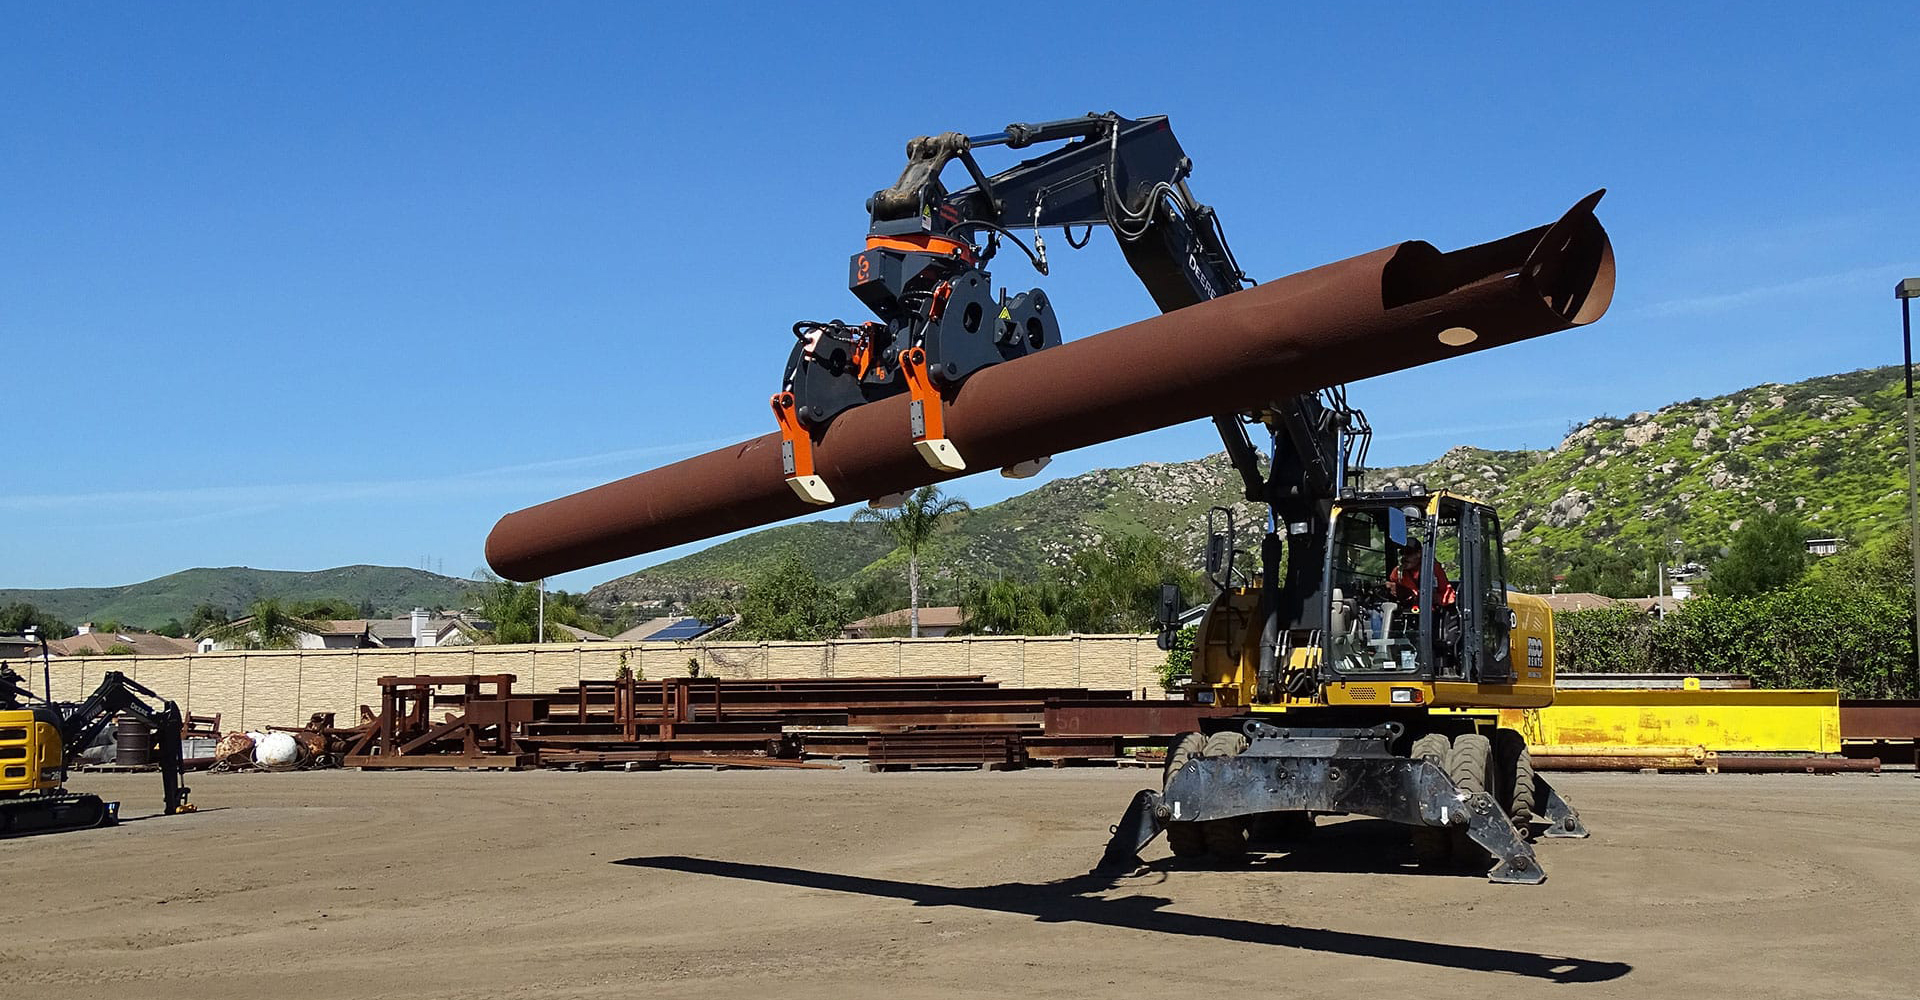 The DECKHAND® system in action! In this image a DECKHAND® is attached to an excavator. Outfitted with Utility Arms, the DECKHAND® makes quick work of horizontal to vertical handling and installing utility poles and casings safely.